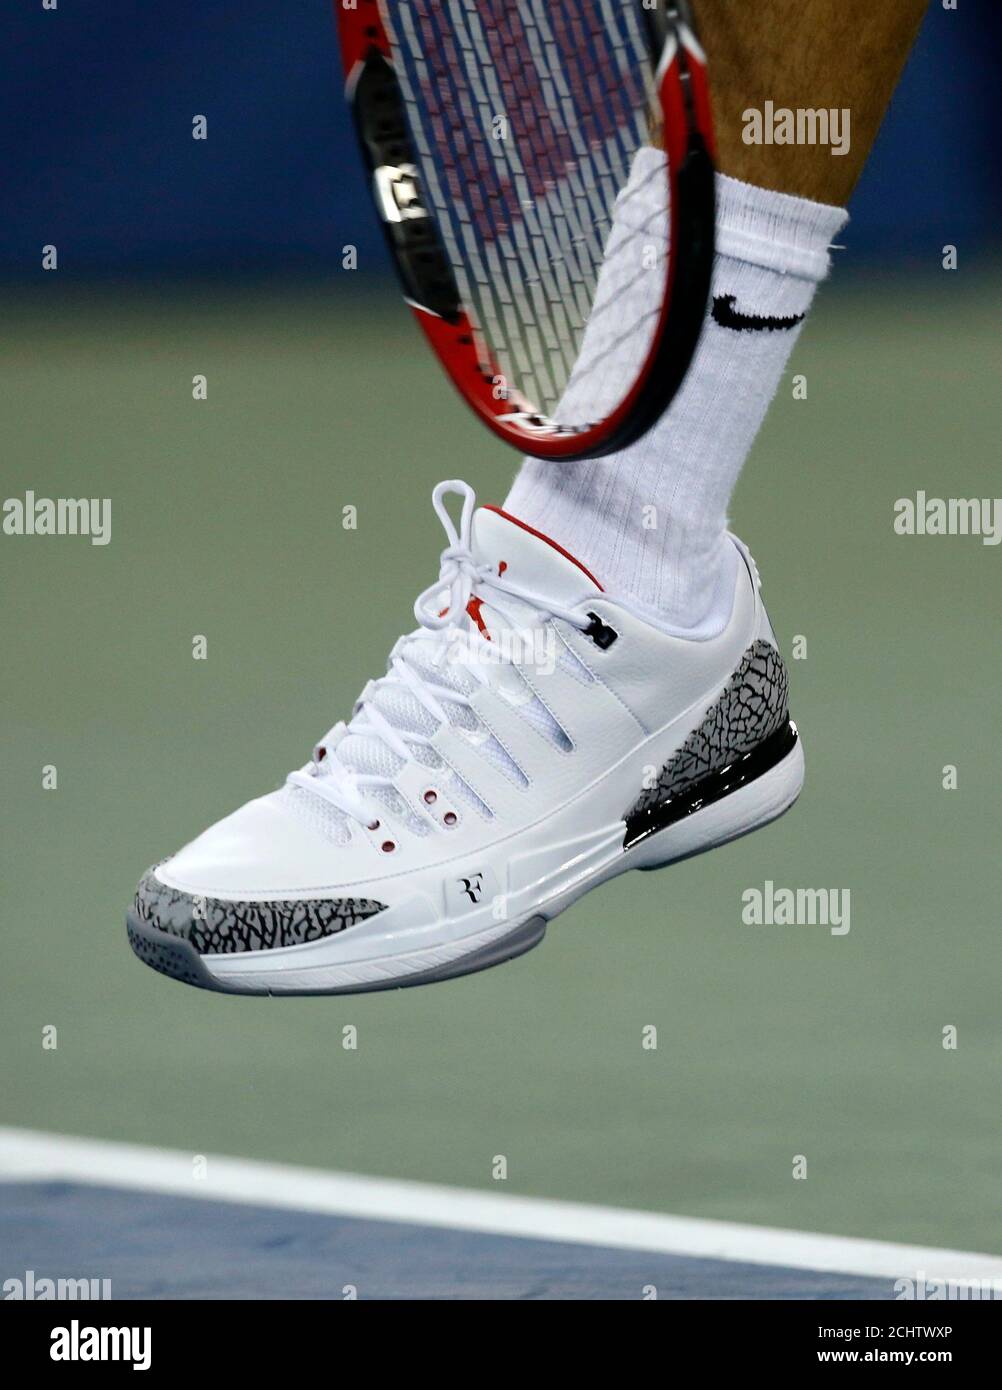 Roger Federer of Switzerland serves while wearing a new shoe, the Nike Zoom  Vapor 9 Tour AJ3 he helped design with basketball great Michael Jordan,  during his men's singles match against Marinko